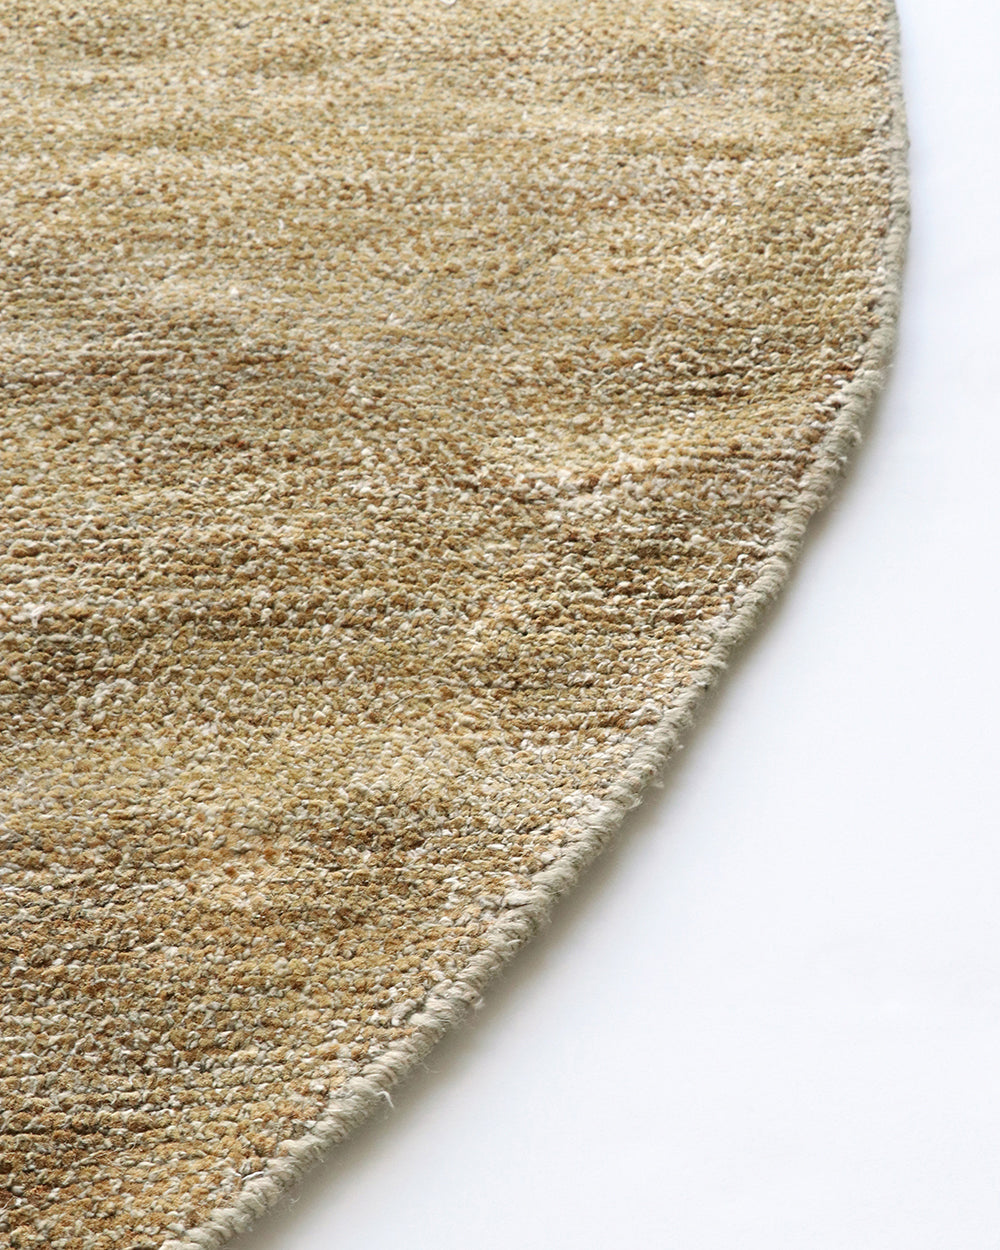 Anchorage Sand Dune Round Rug from Baya Furtex Stockist Make Your House A Home, Furniture Store Bendigo. Free Australia Wide Delivery. Mulberi Rugs.